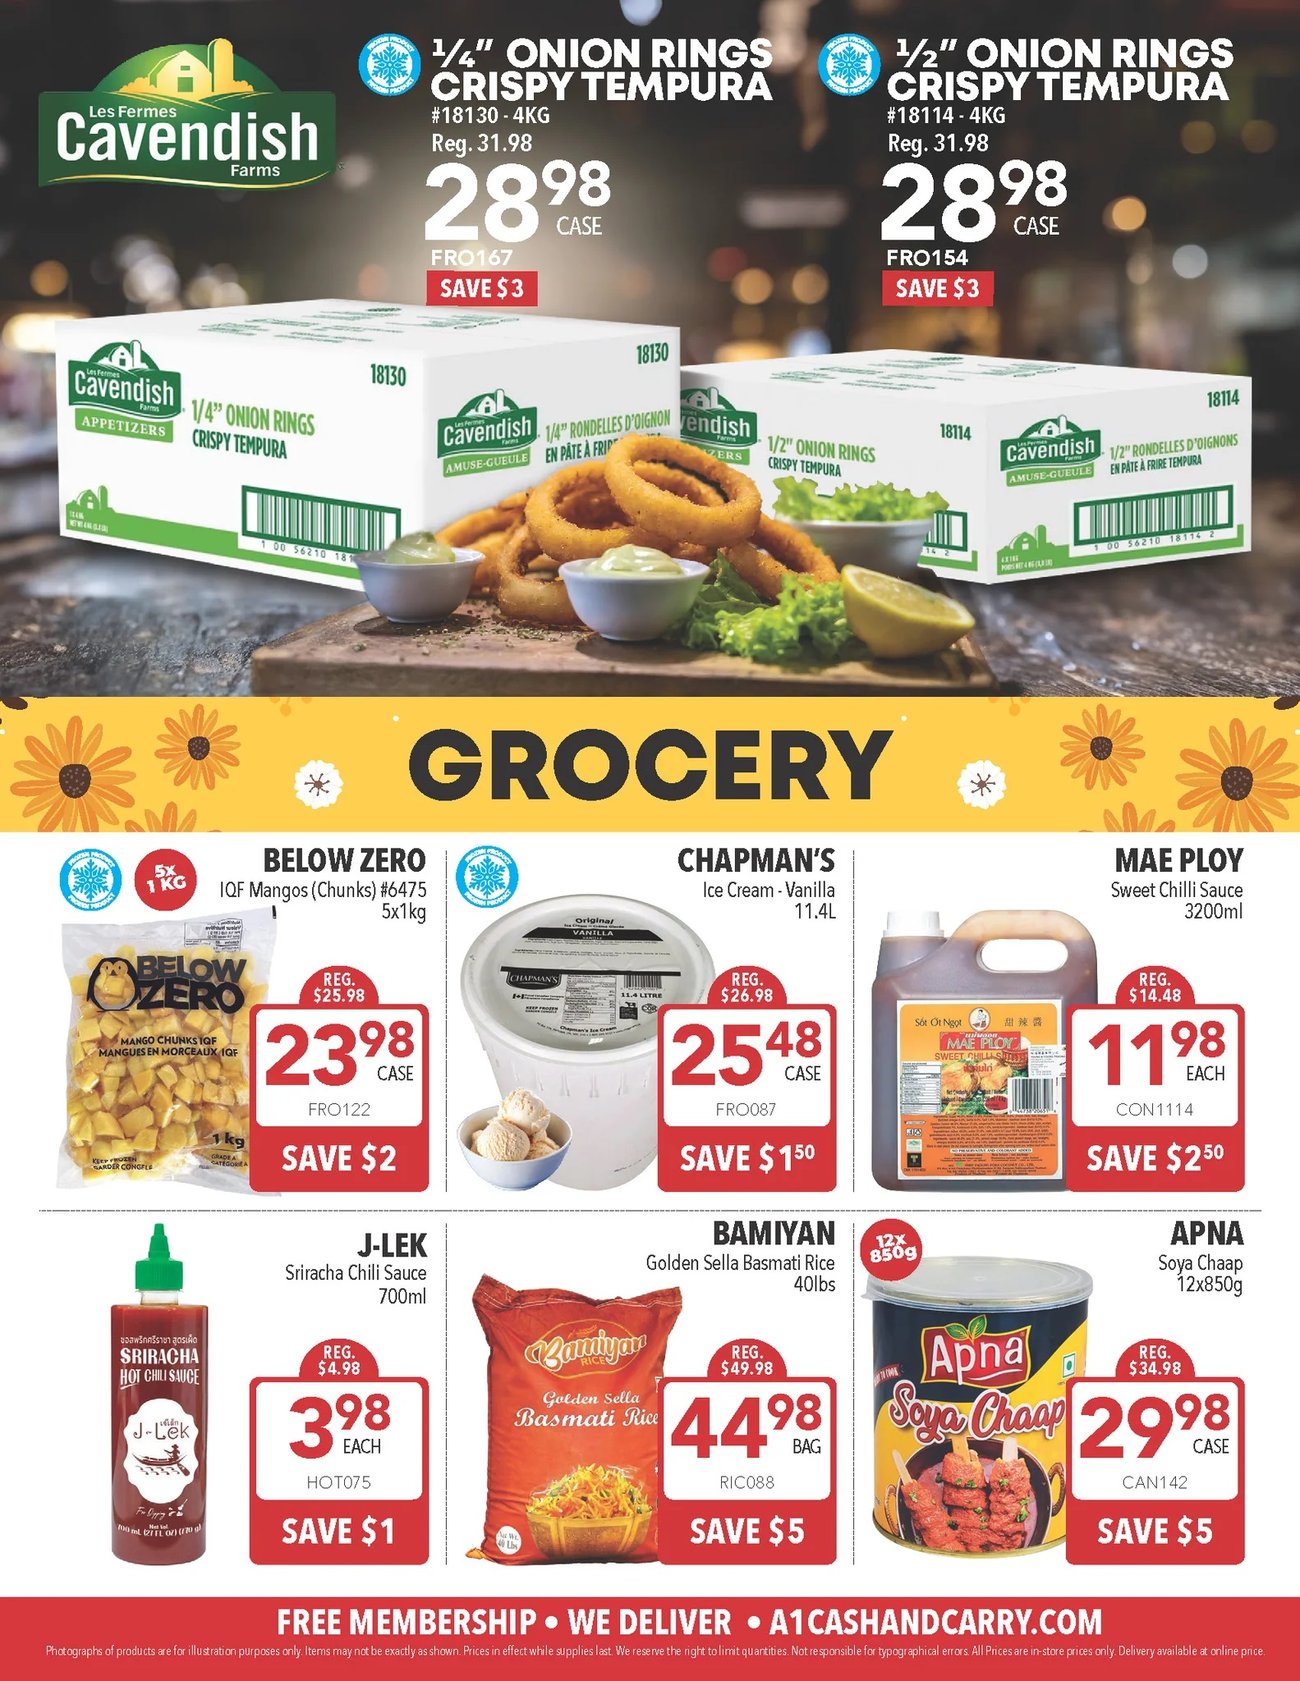 A1 Cash & Carry - Flyer Specials - Page 3